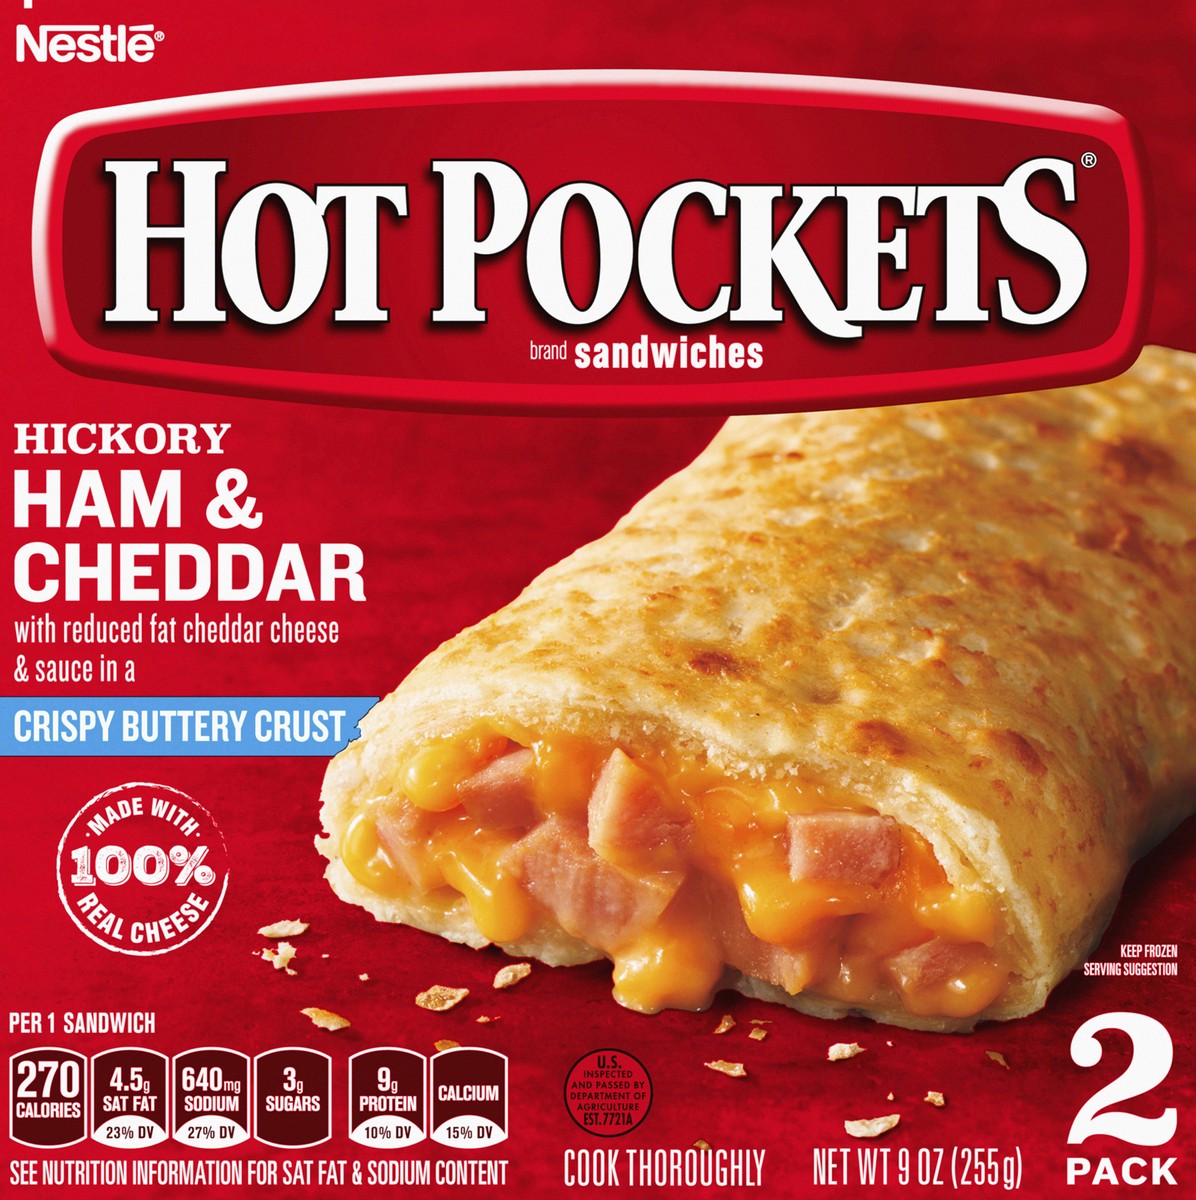 slide 5 of 8, Hot Pockets Hickory Ham & Cheddar Frozen Snacks in a Crispy Buttery Crust, Frozen Ham and Cheese Sandwiches Made with Real Reduced Fat Cheddar Cheese, 2 Count Frozen Sandwiches, 2 ct; 4.5 oz